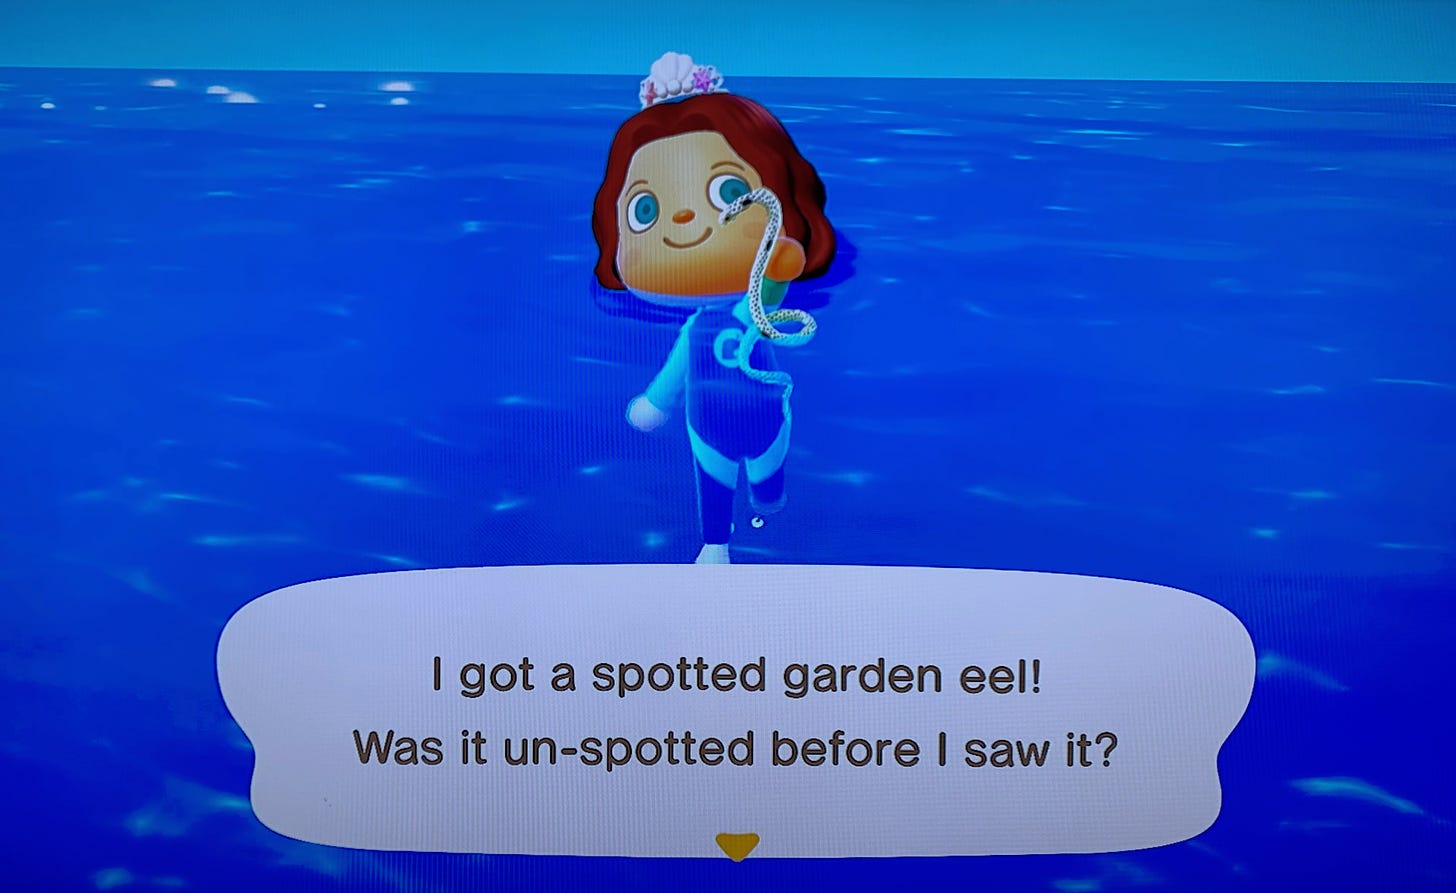 Image from animal crossing nintendo game, where an avatar wearing a mermaid tiara is holding a spotted garden eel.